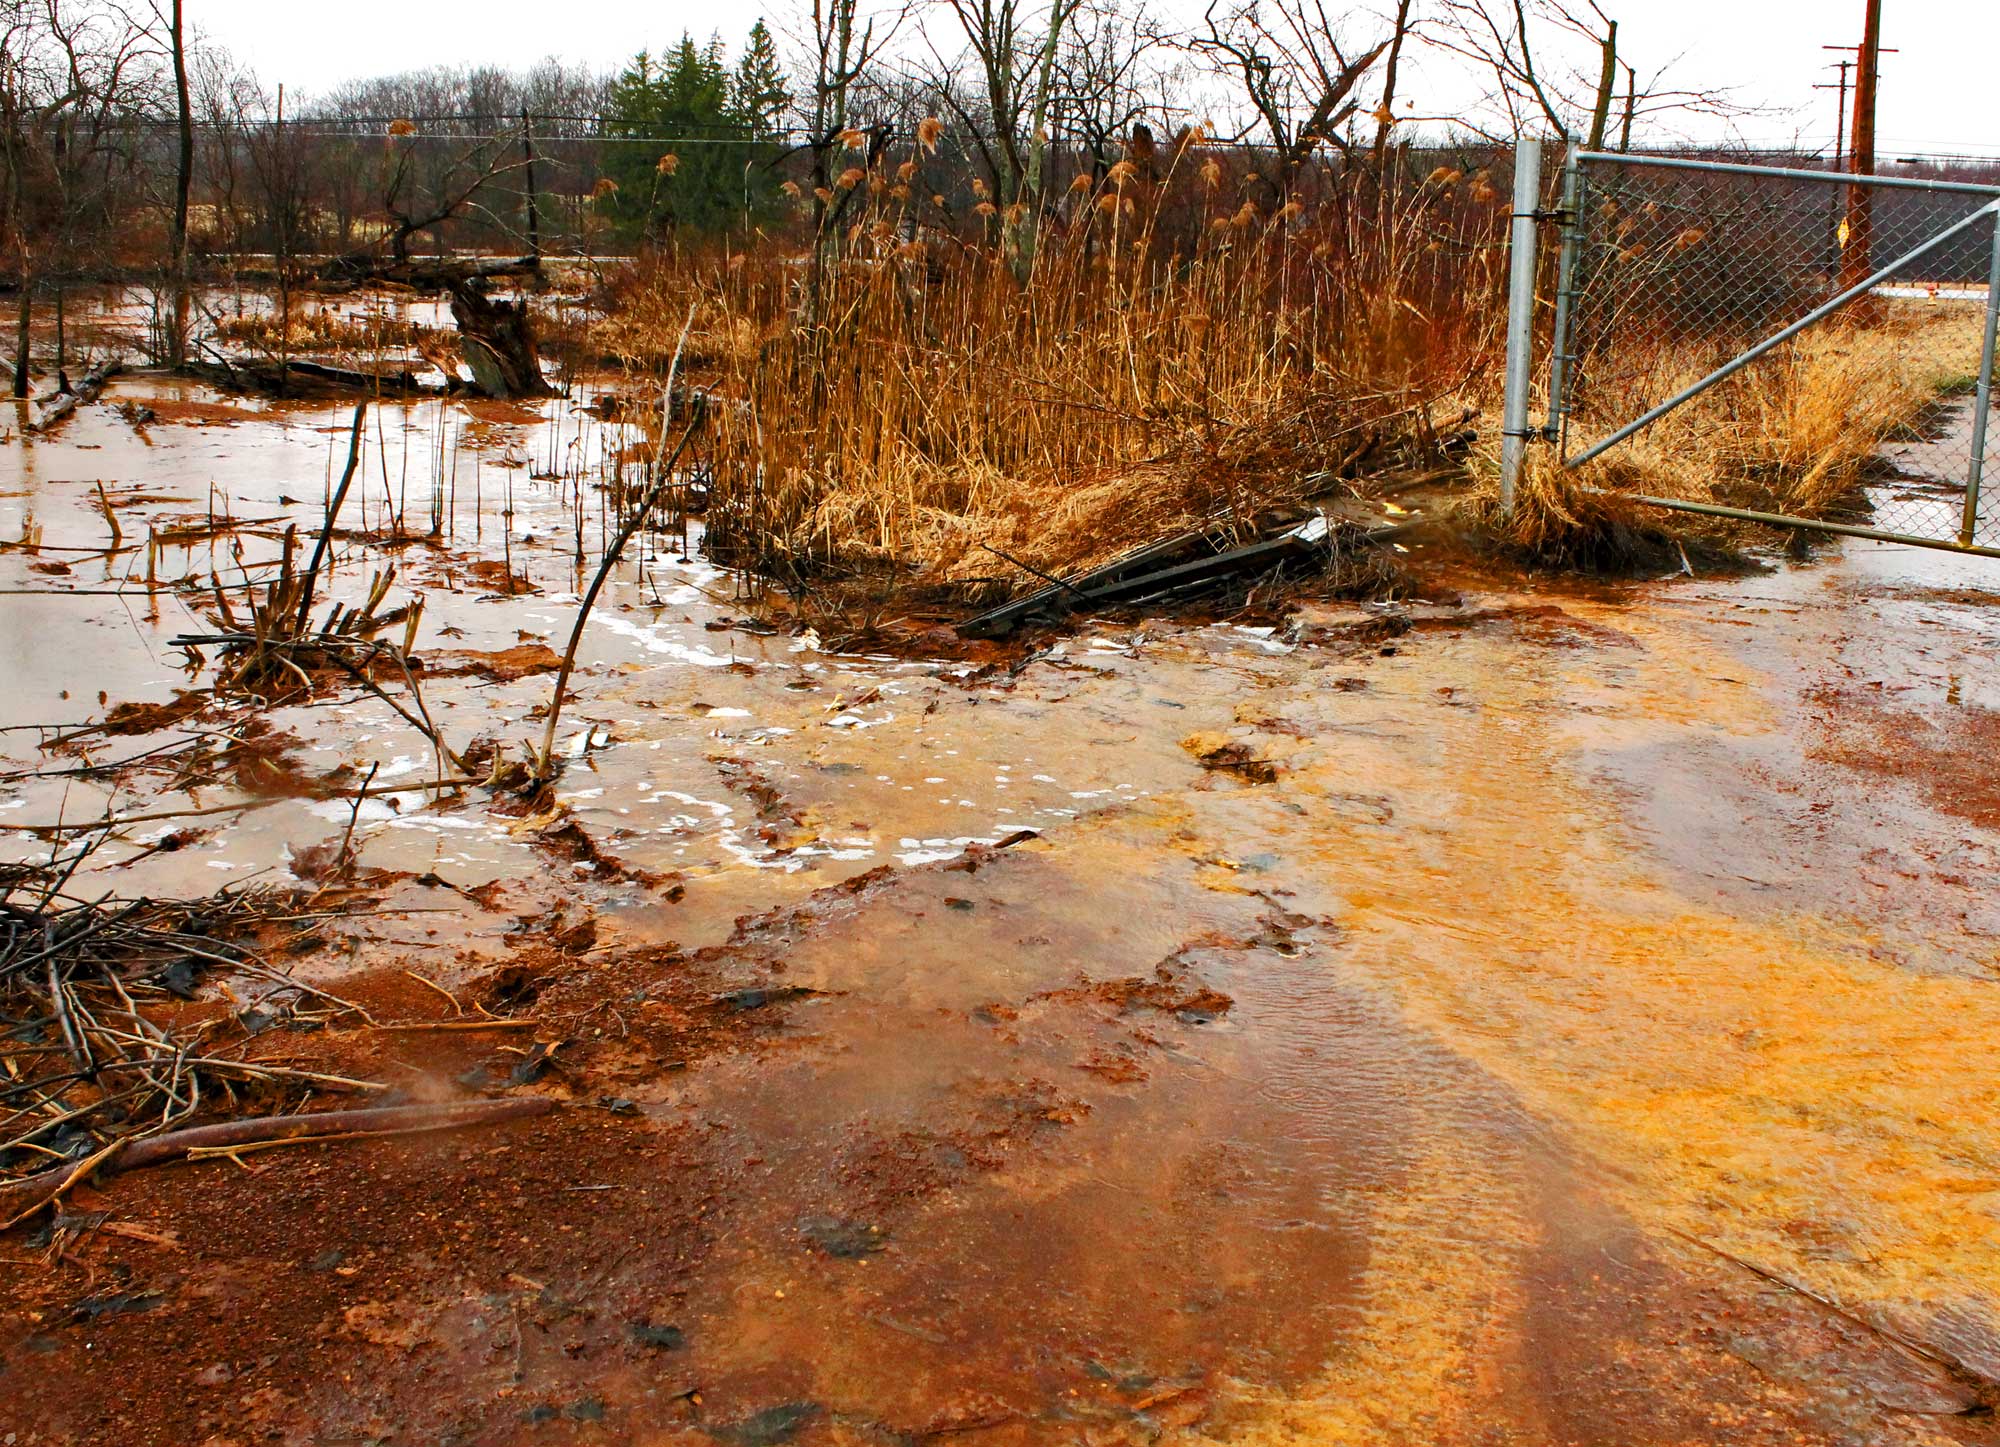 Photograph of acid mine drainage in North Lima, Ohio. The photo shows standing water surrounding a patch of reeds, with a metal gate at the upper right and fencing in the background. The water is a rusty brown-orange to light orange color, indicating that it is polluted.